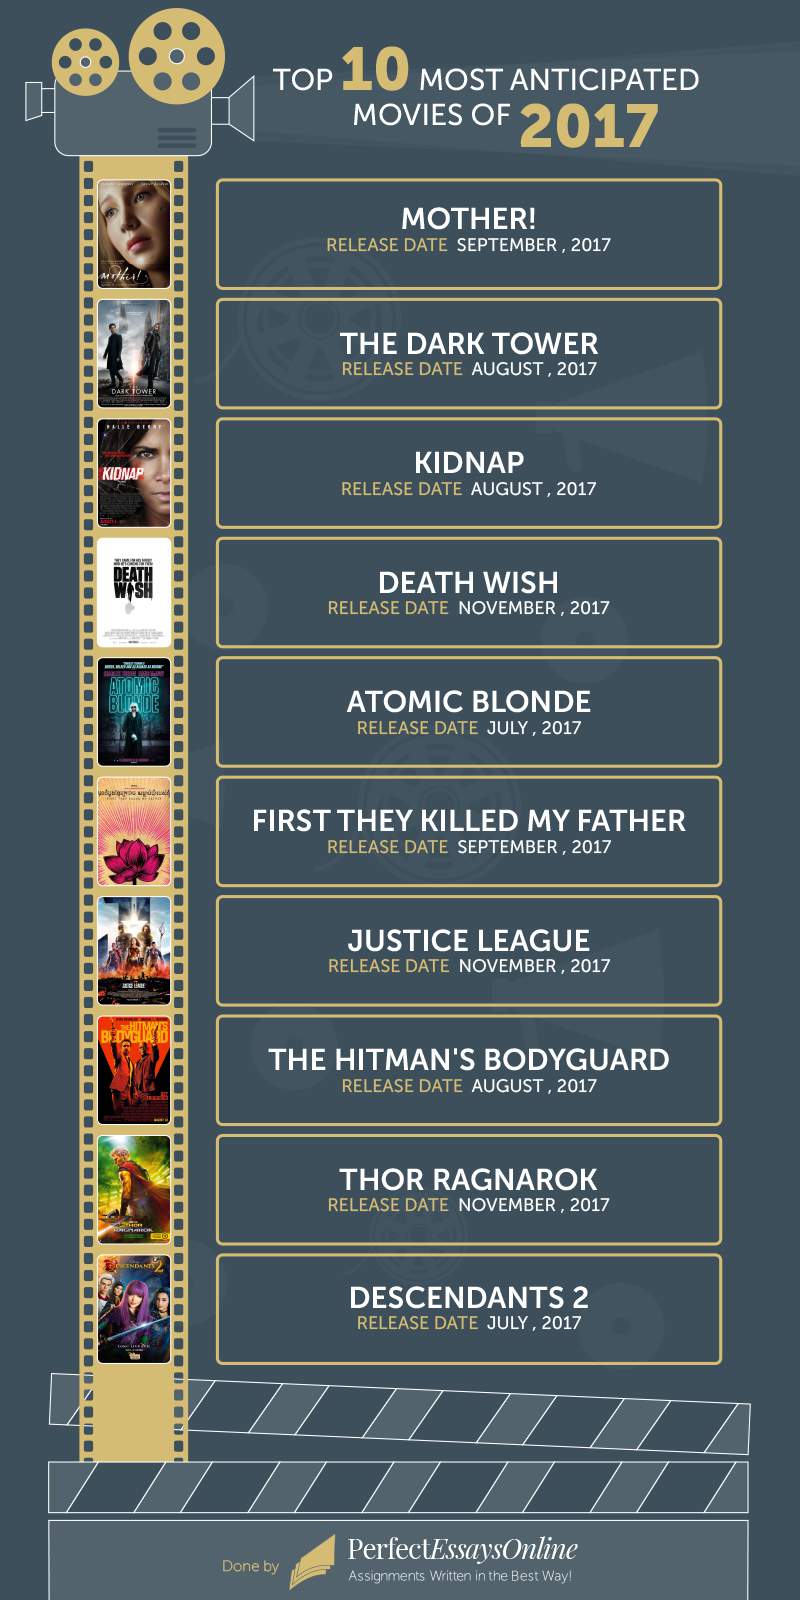 List of the Most Anticipated Movies of 2017